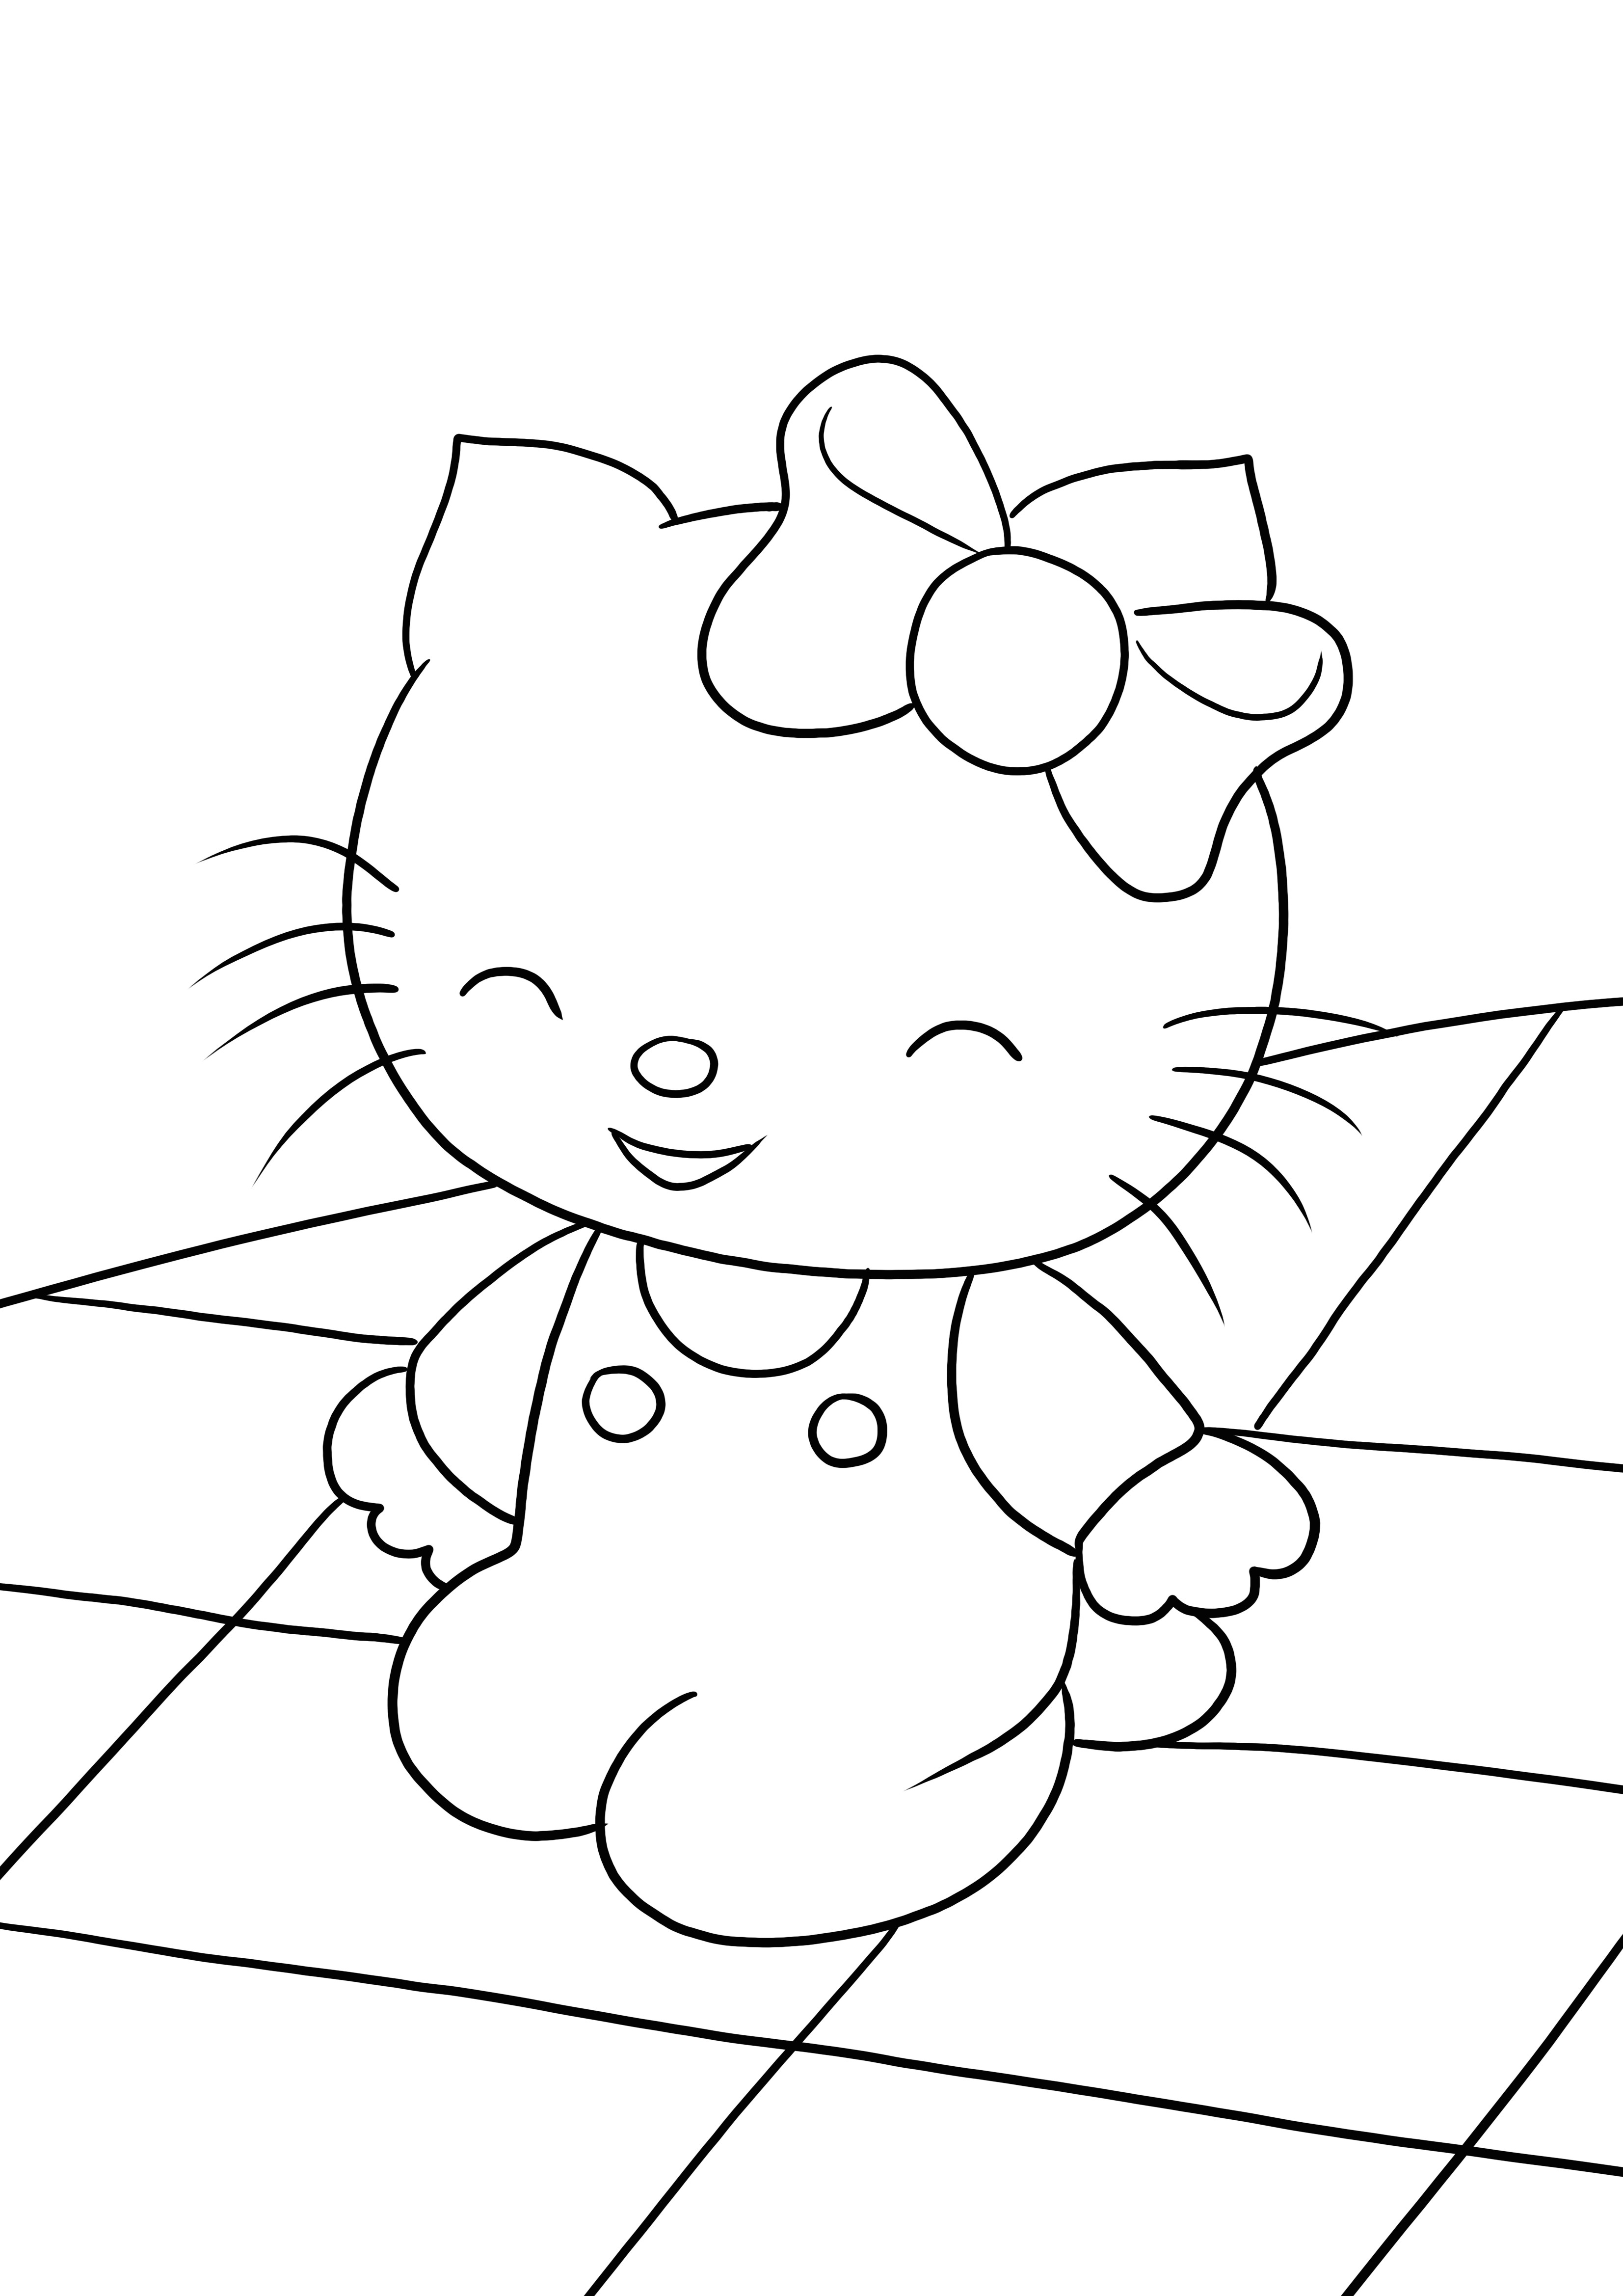 Our Happy Hello Kitty is here and ready to be colored and printed for free